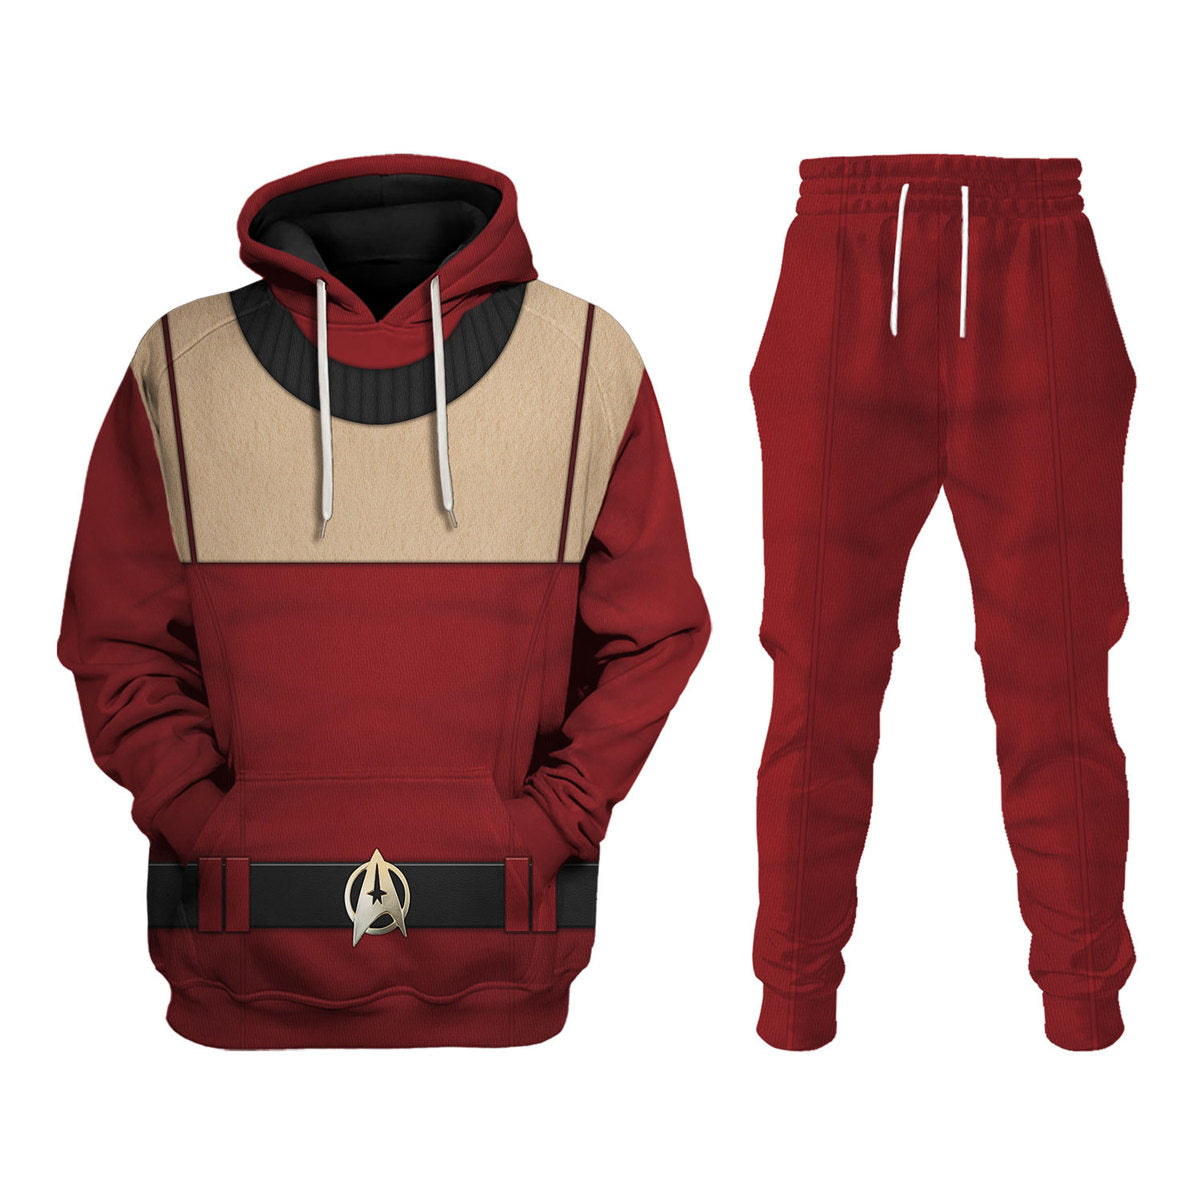 Young Picard track suit 